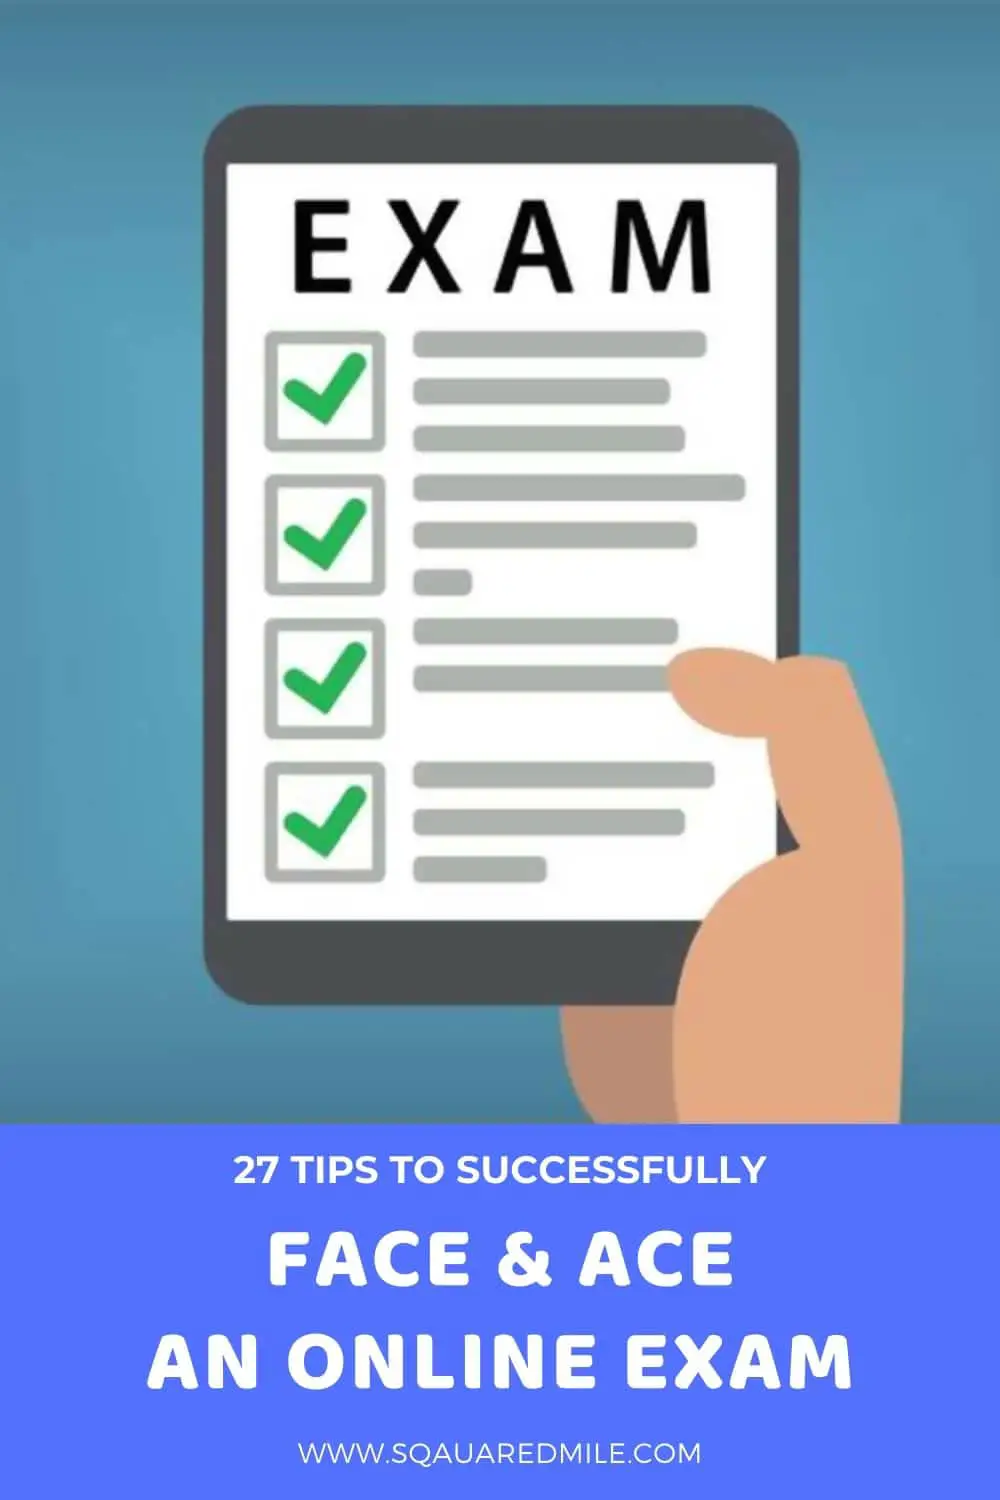 27 tips to taking an online exam and acing it